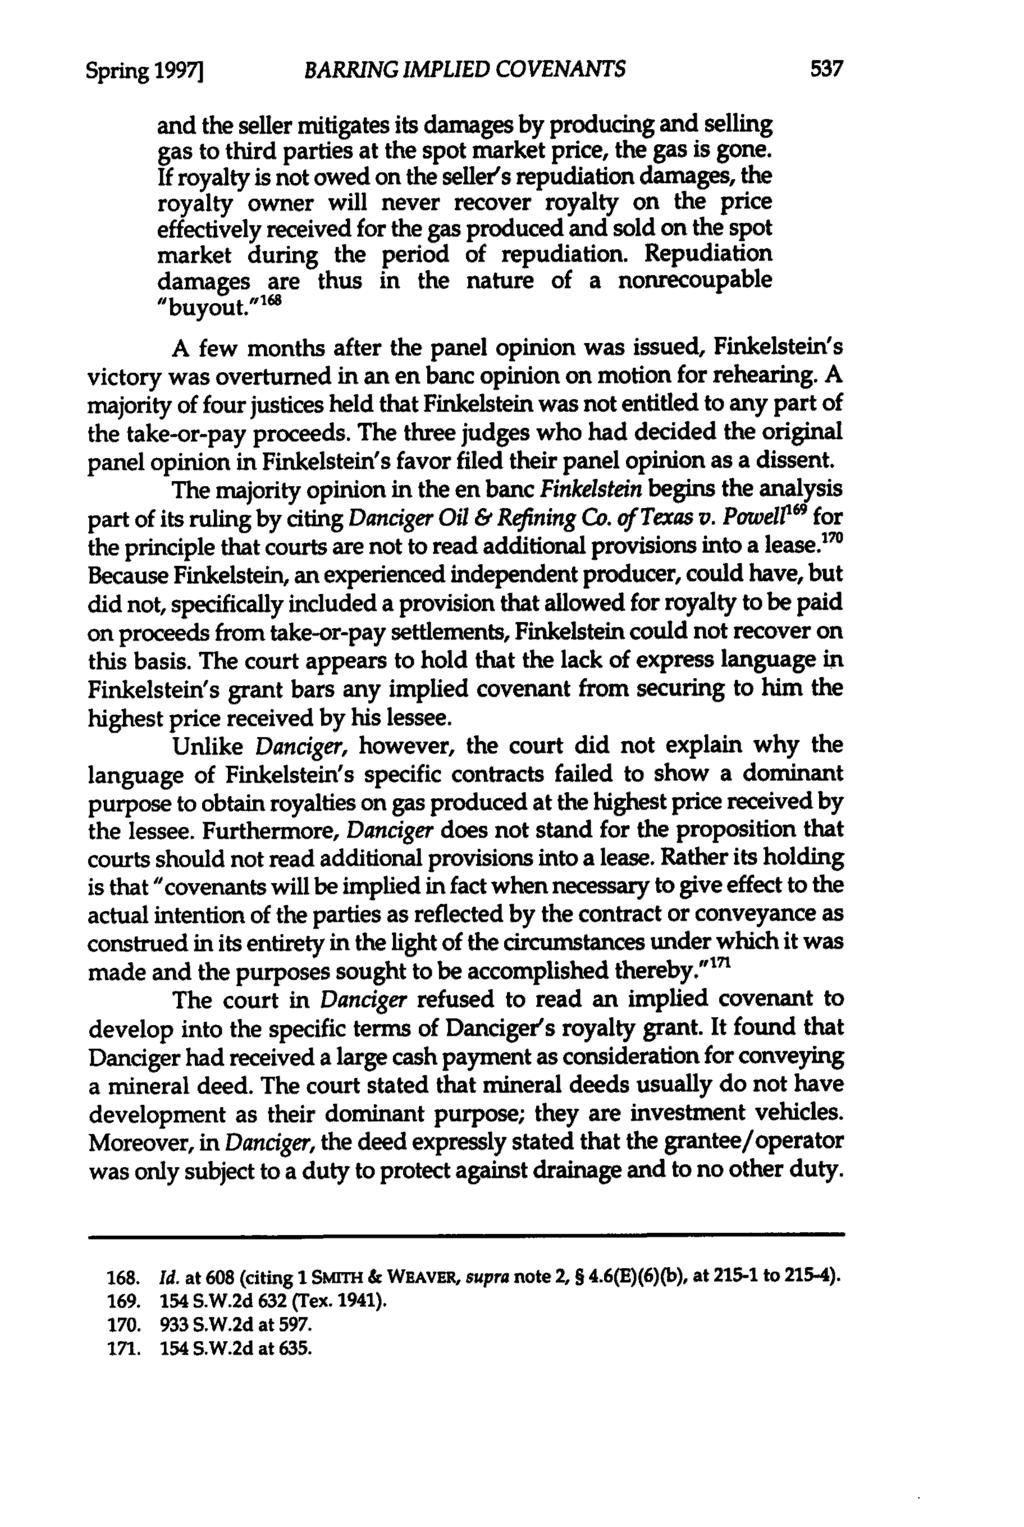 Spring 1997] BARRING IMPLIED COVENANTS and the seller mitigates its damages by producing and selling gas to third parties at the spot market price, the gas is gone.